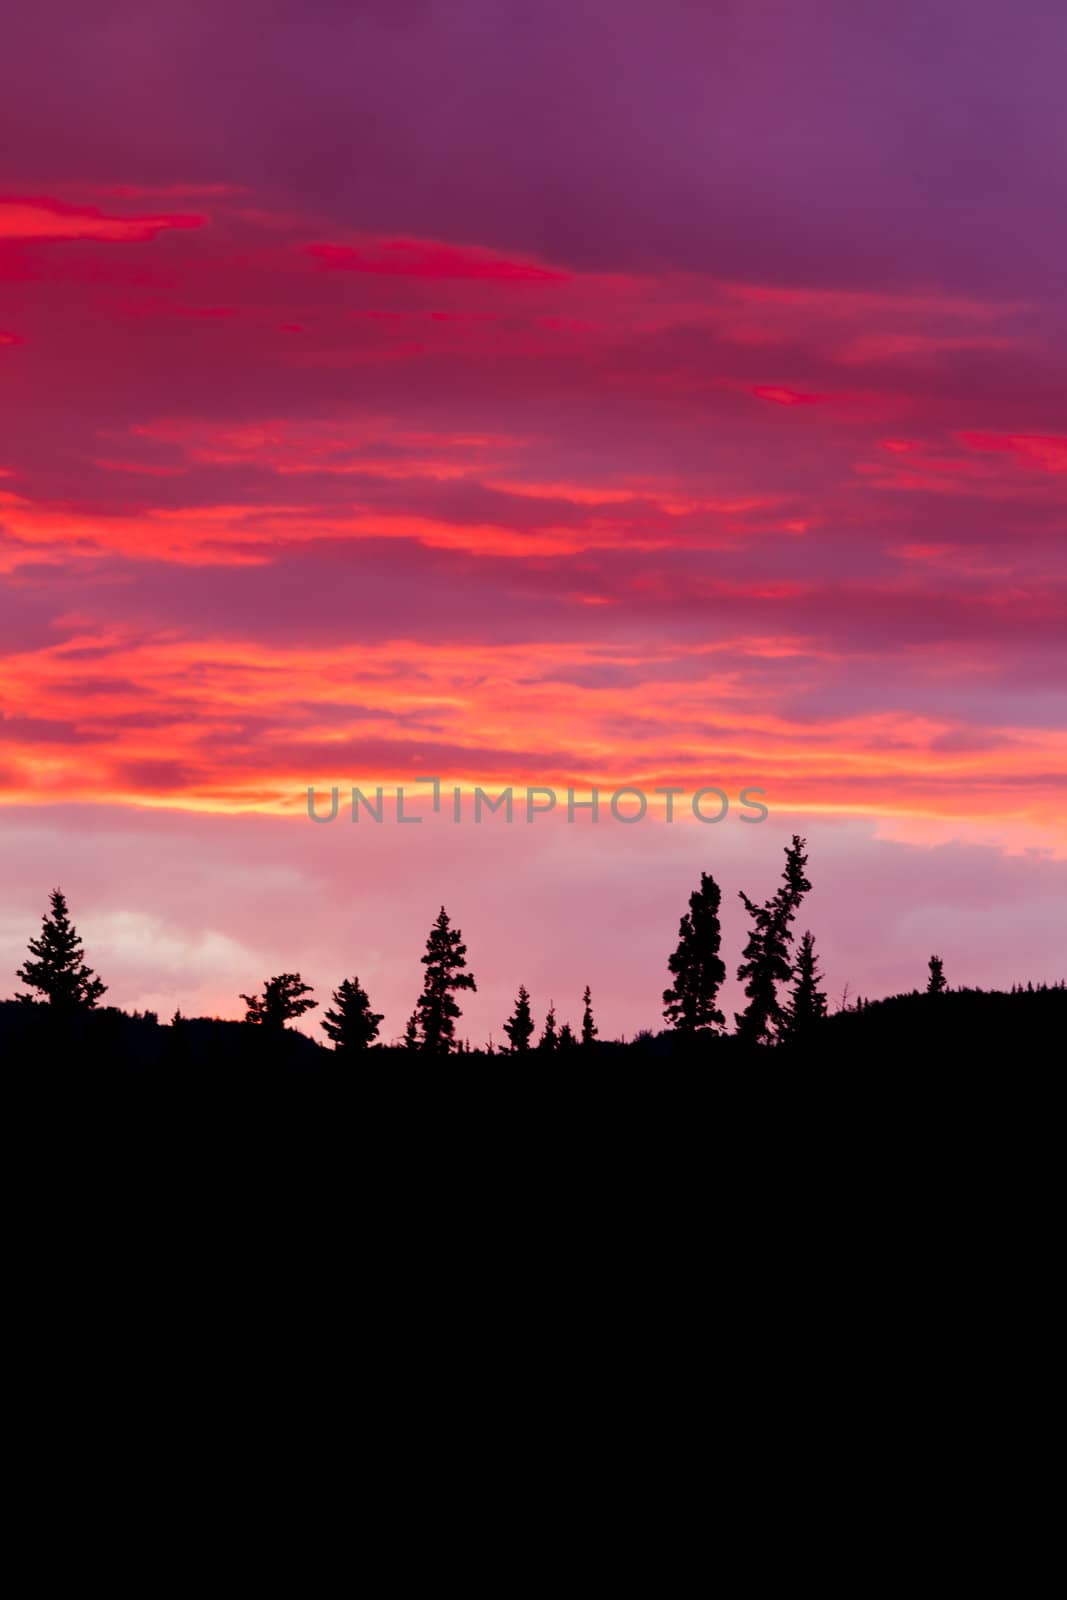 Cloudy sunset sky on fire over silhouette of forested hills.